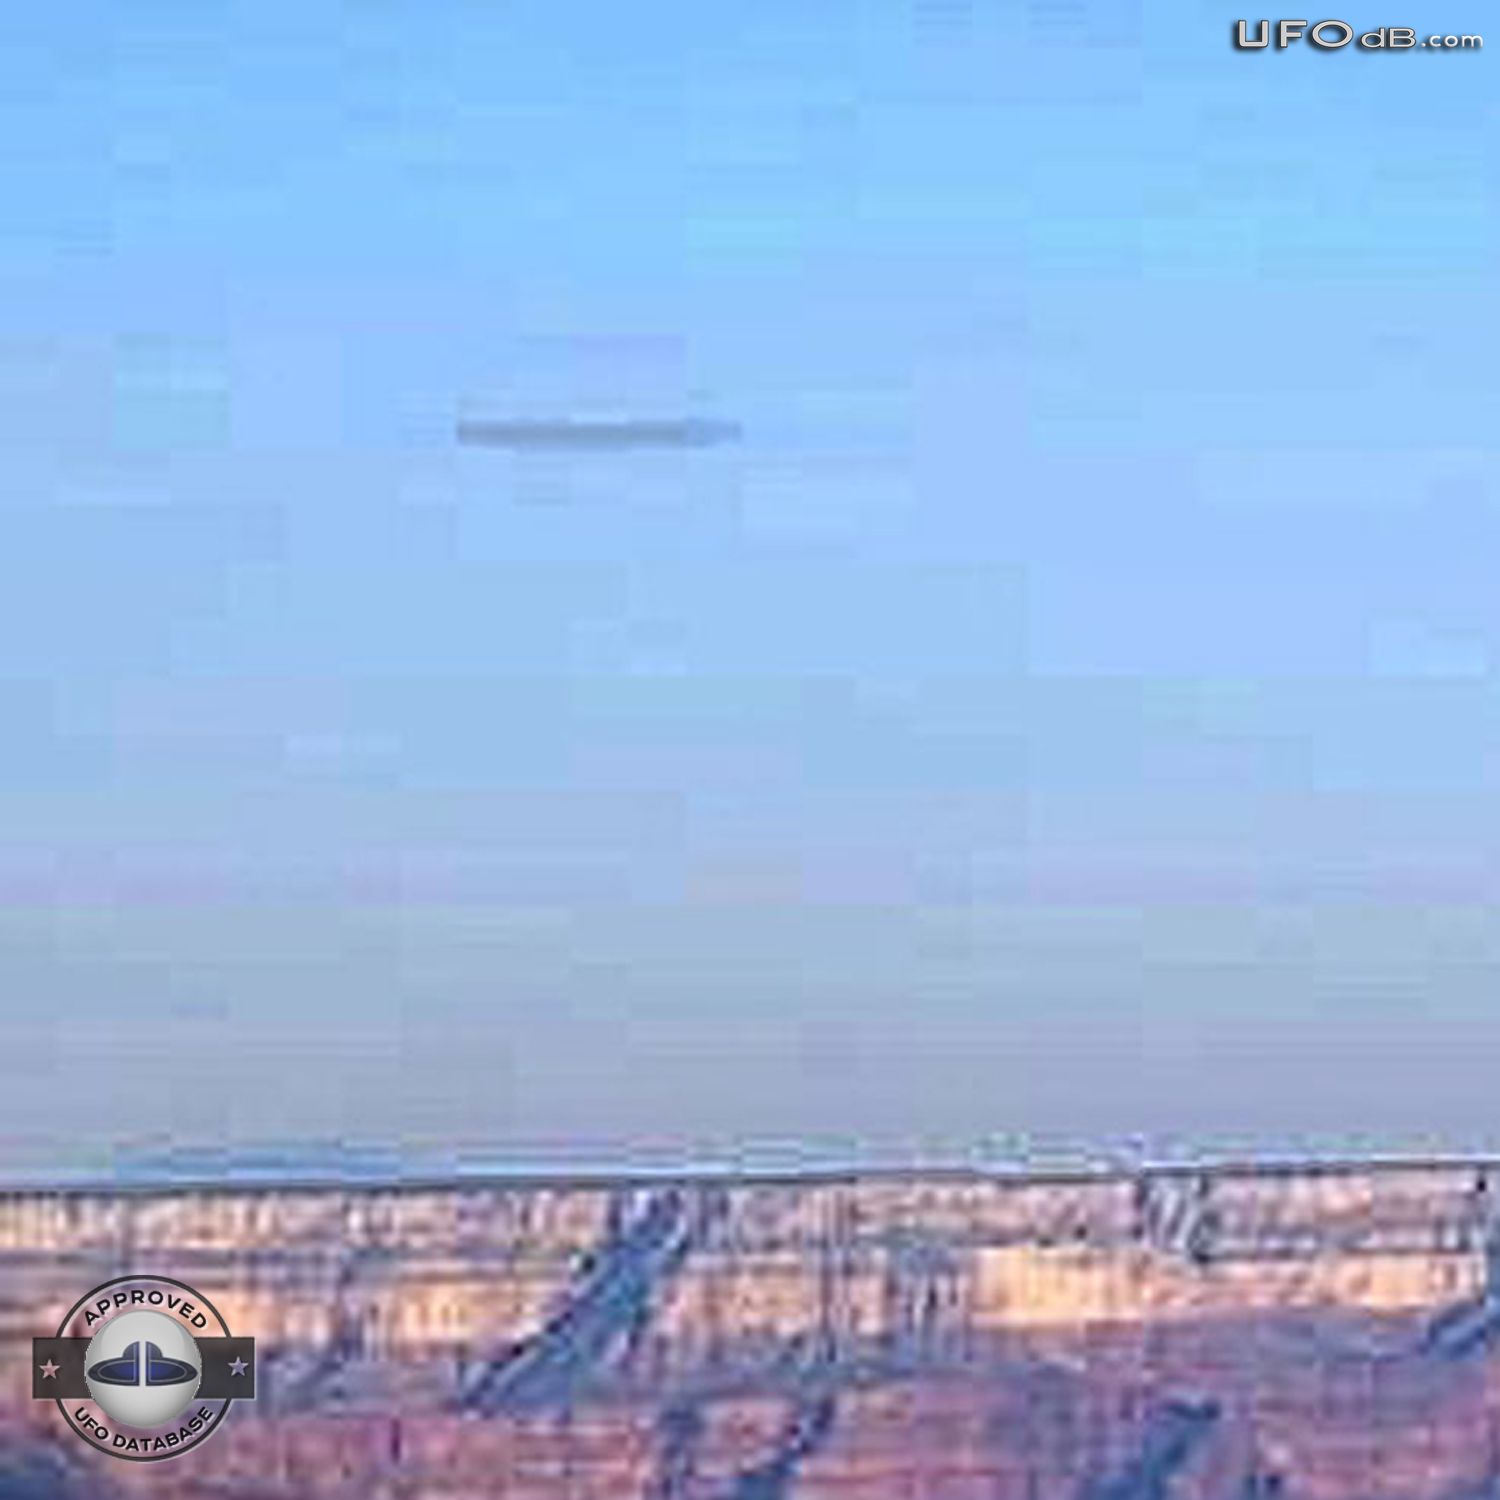 Yavapai Point Cam capture UFO picture | Grand Canyon USA | May 24 2011 UFO Picture #323-3